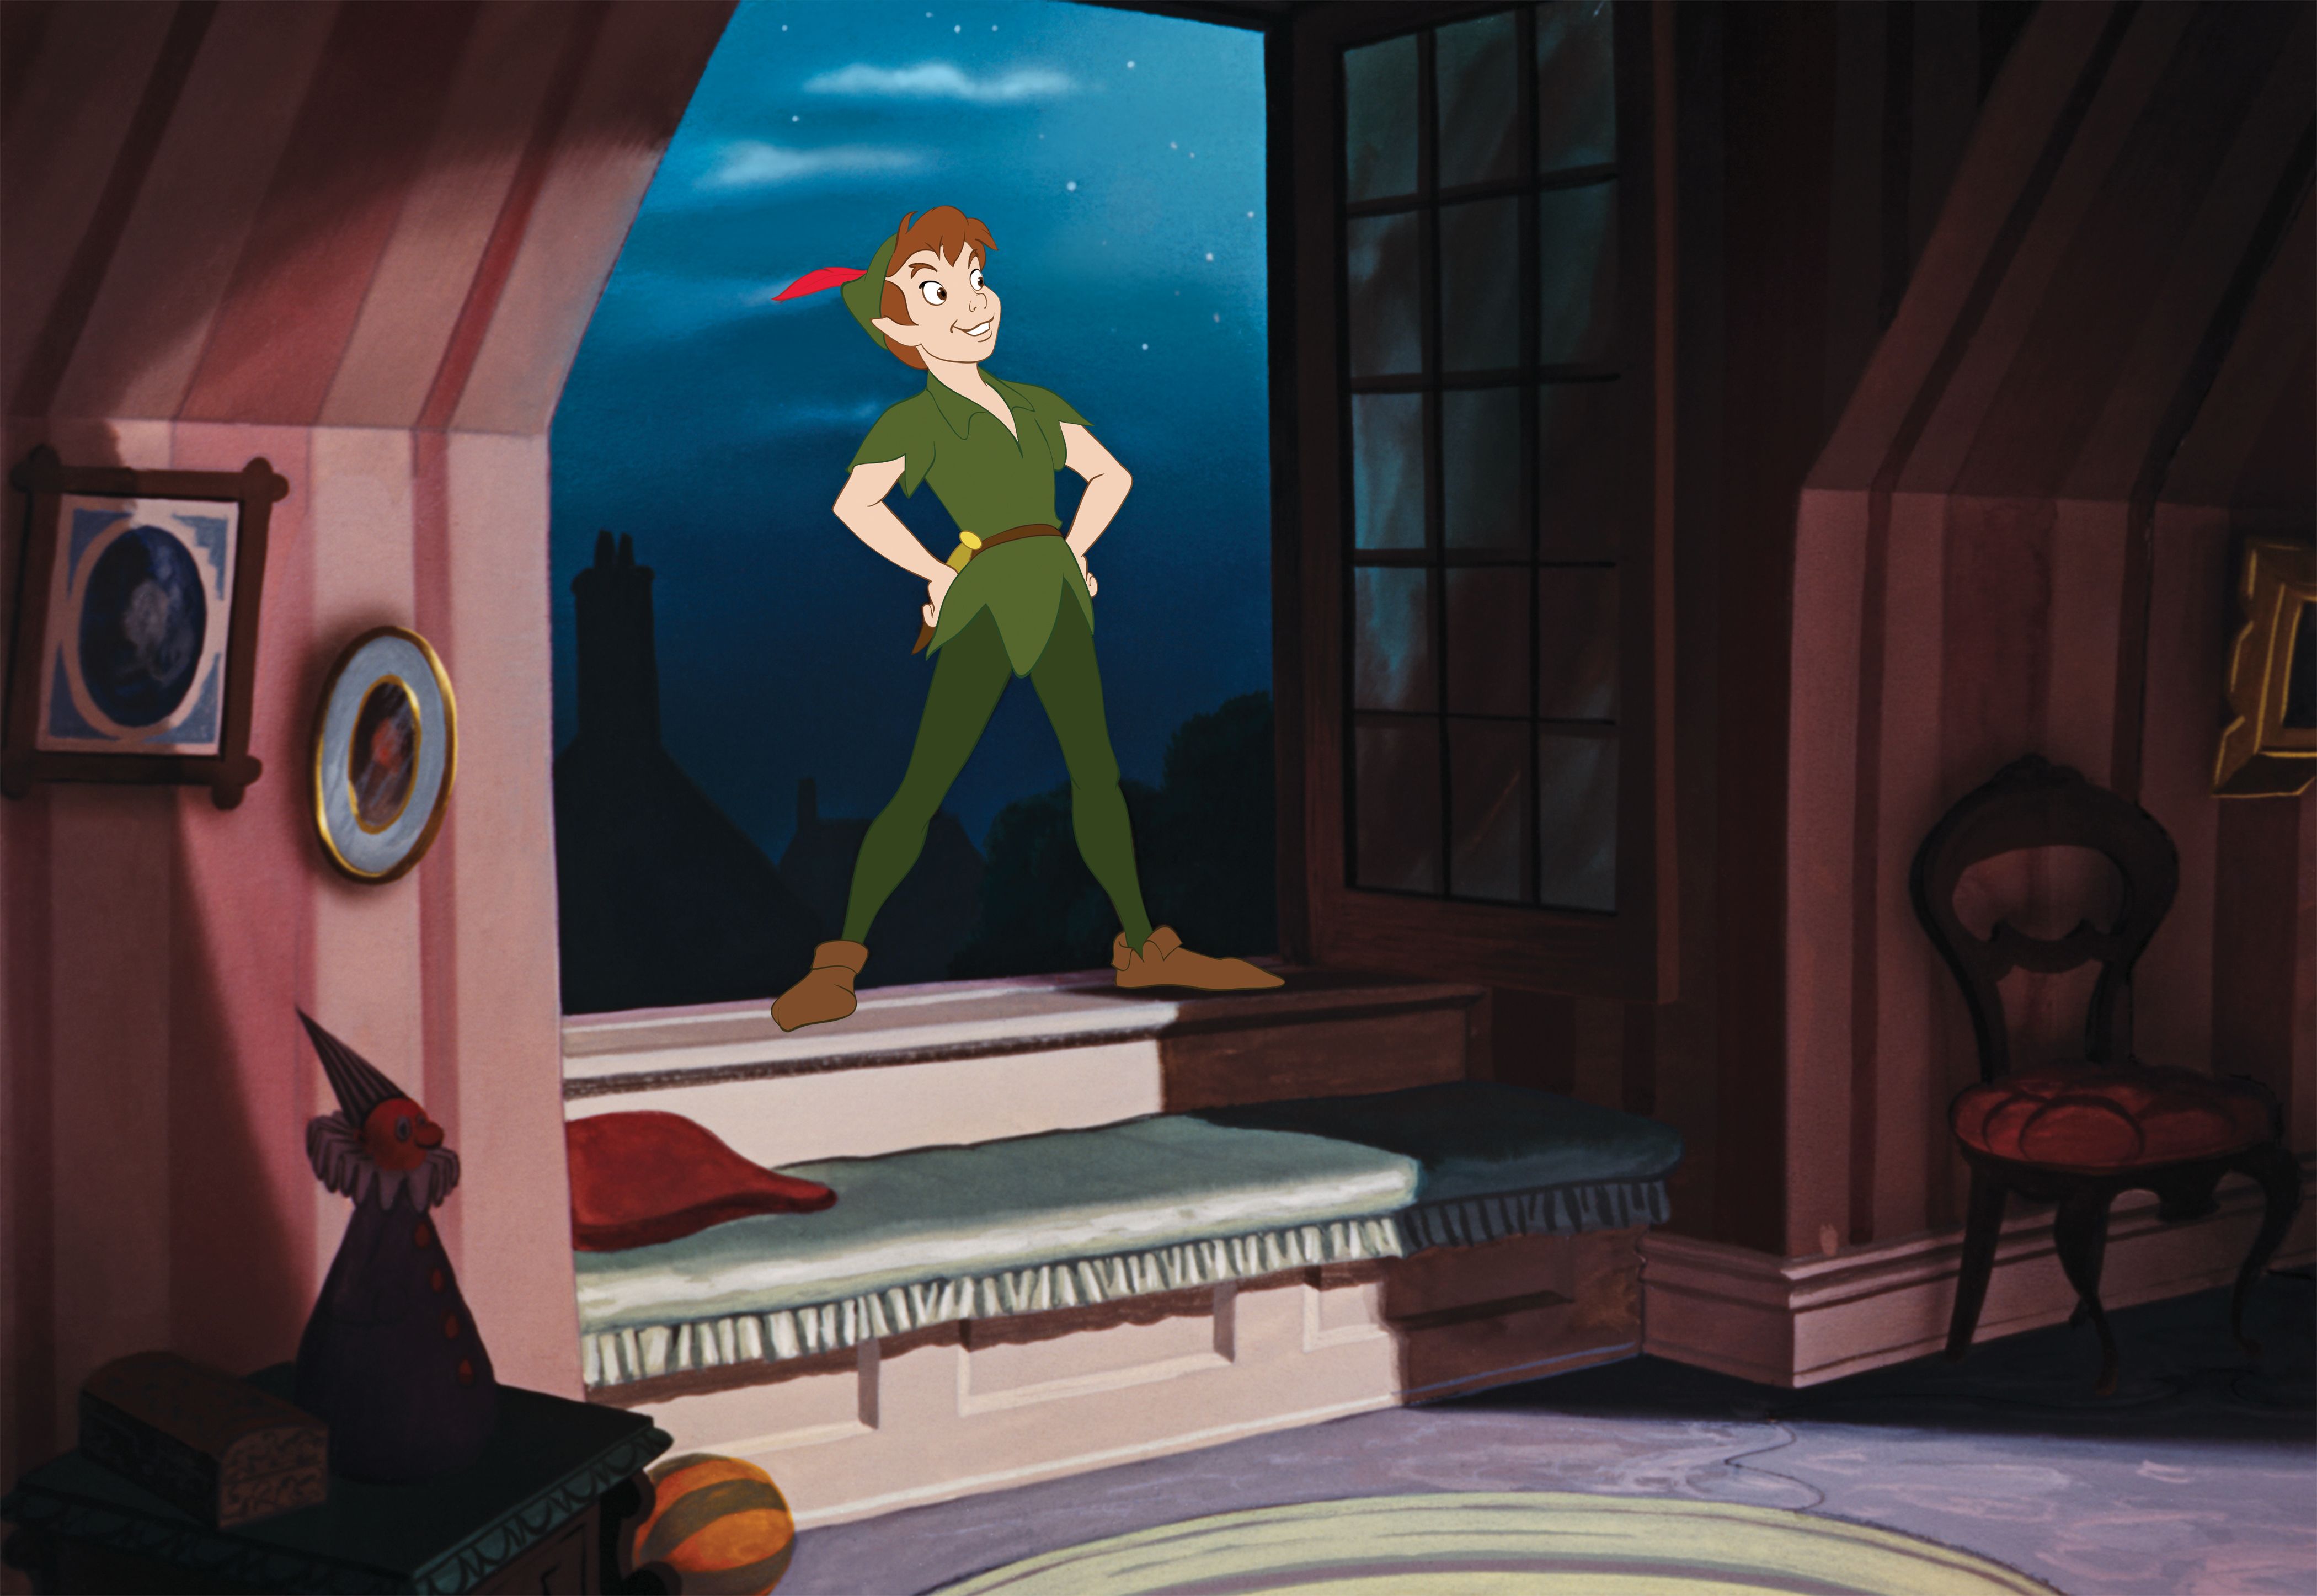 peter-pan-bluray-65th-anniversary-images